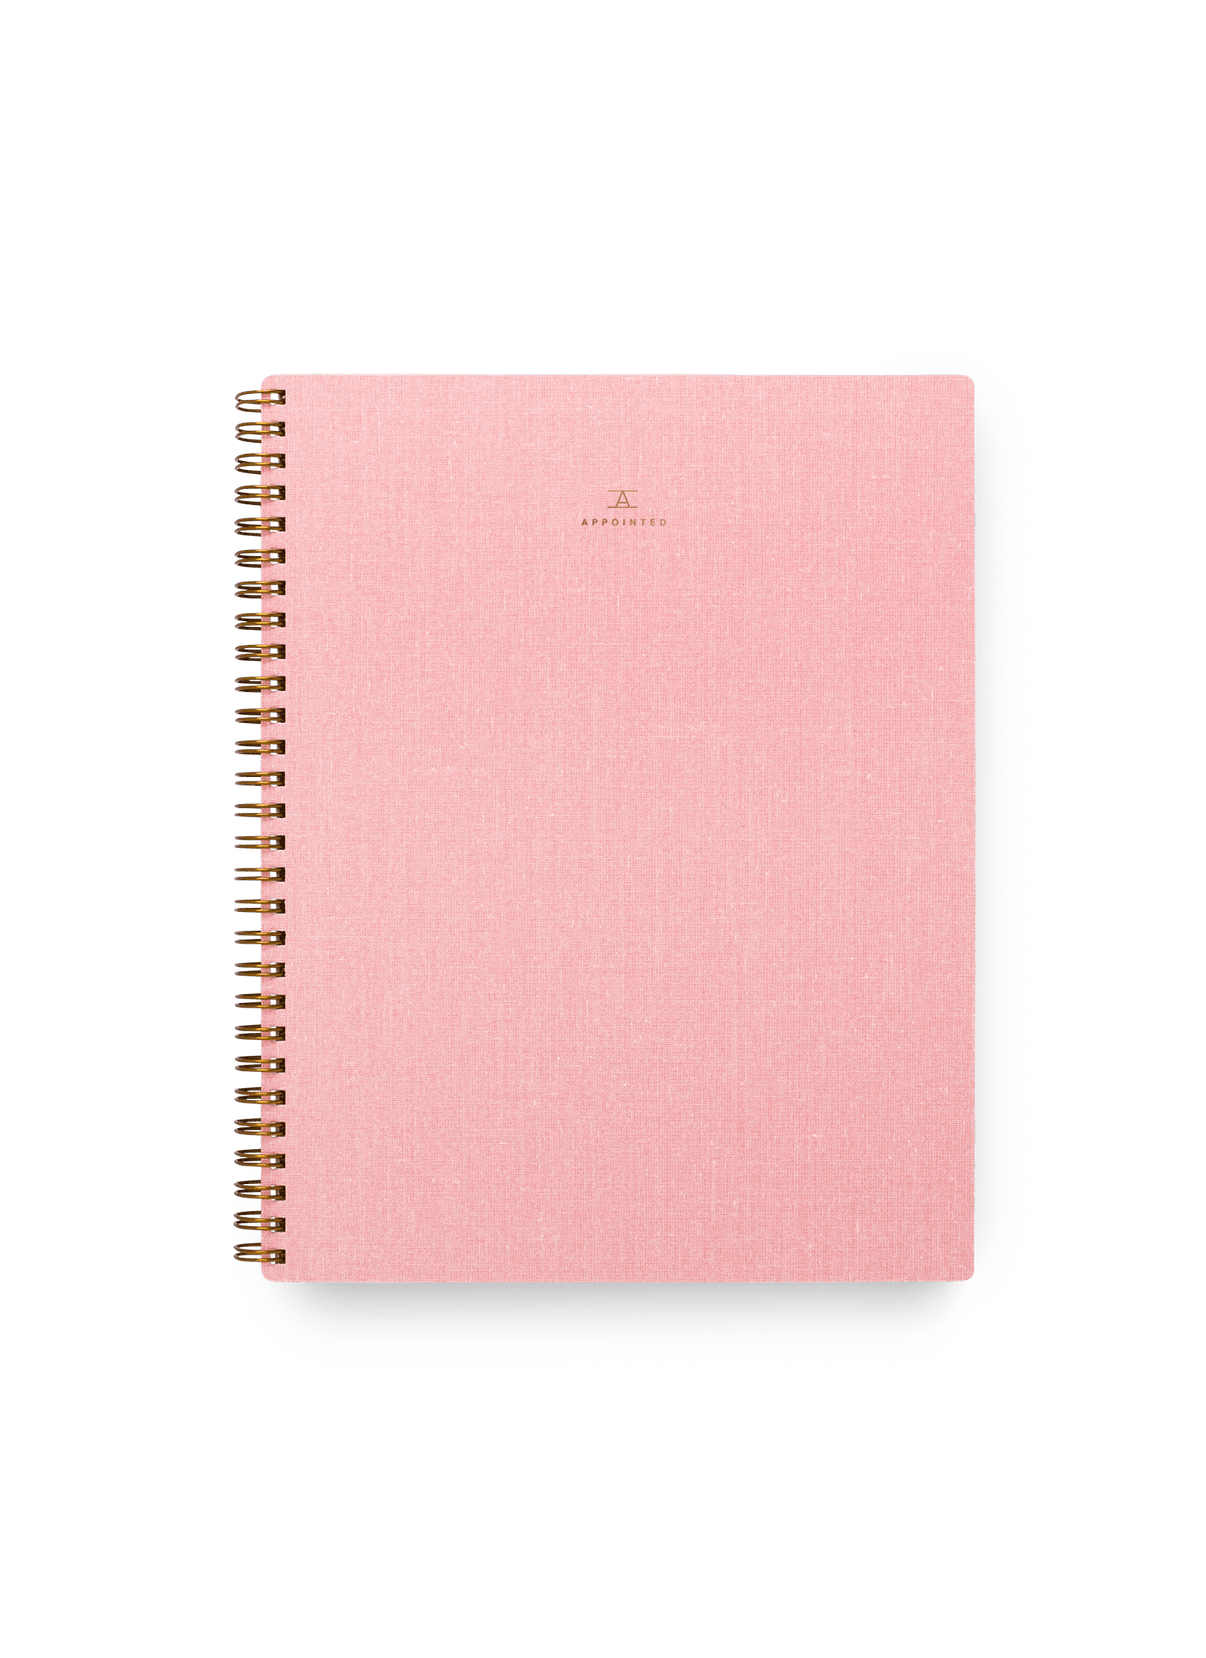 Appointed Notebook in Blossom Pink bookcloth with brass wire-o binding front view || Blossom Pink